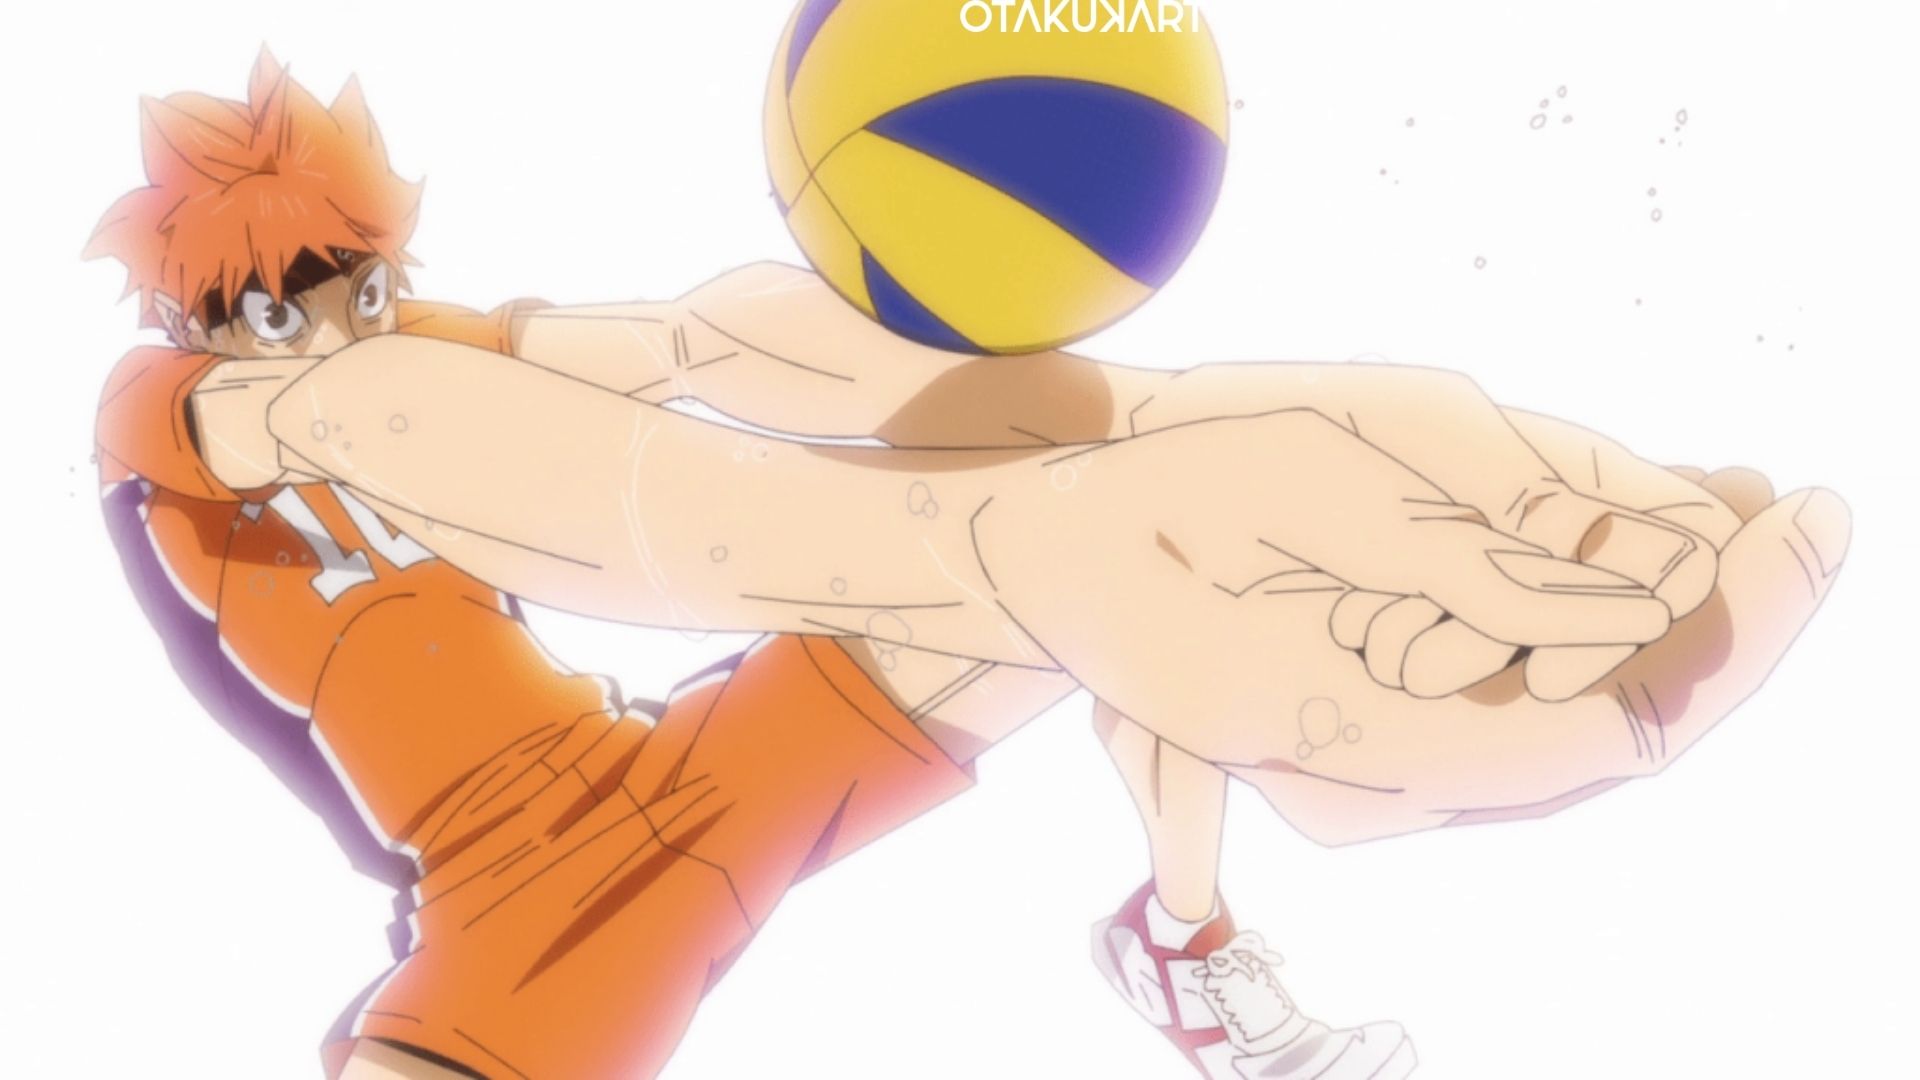 in which episode does Hinata receives the ball in Haikyuu